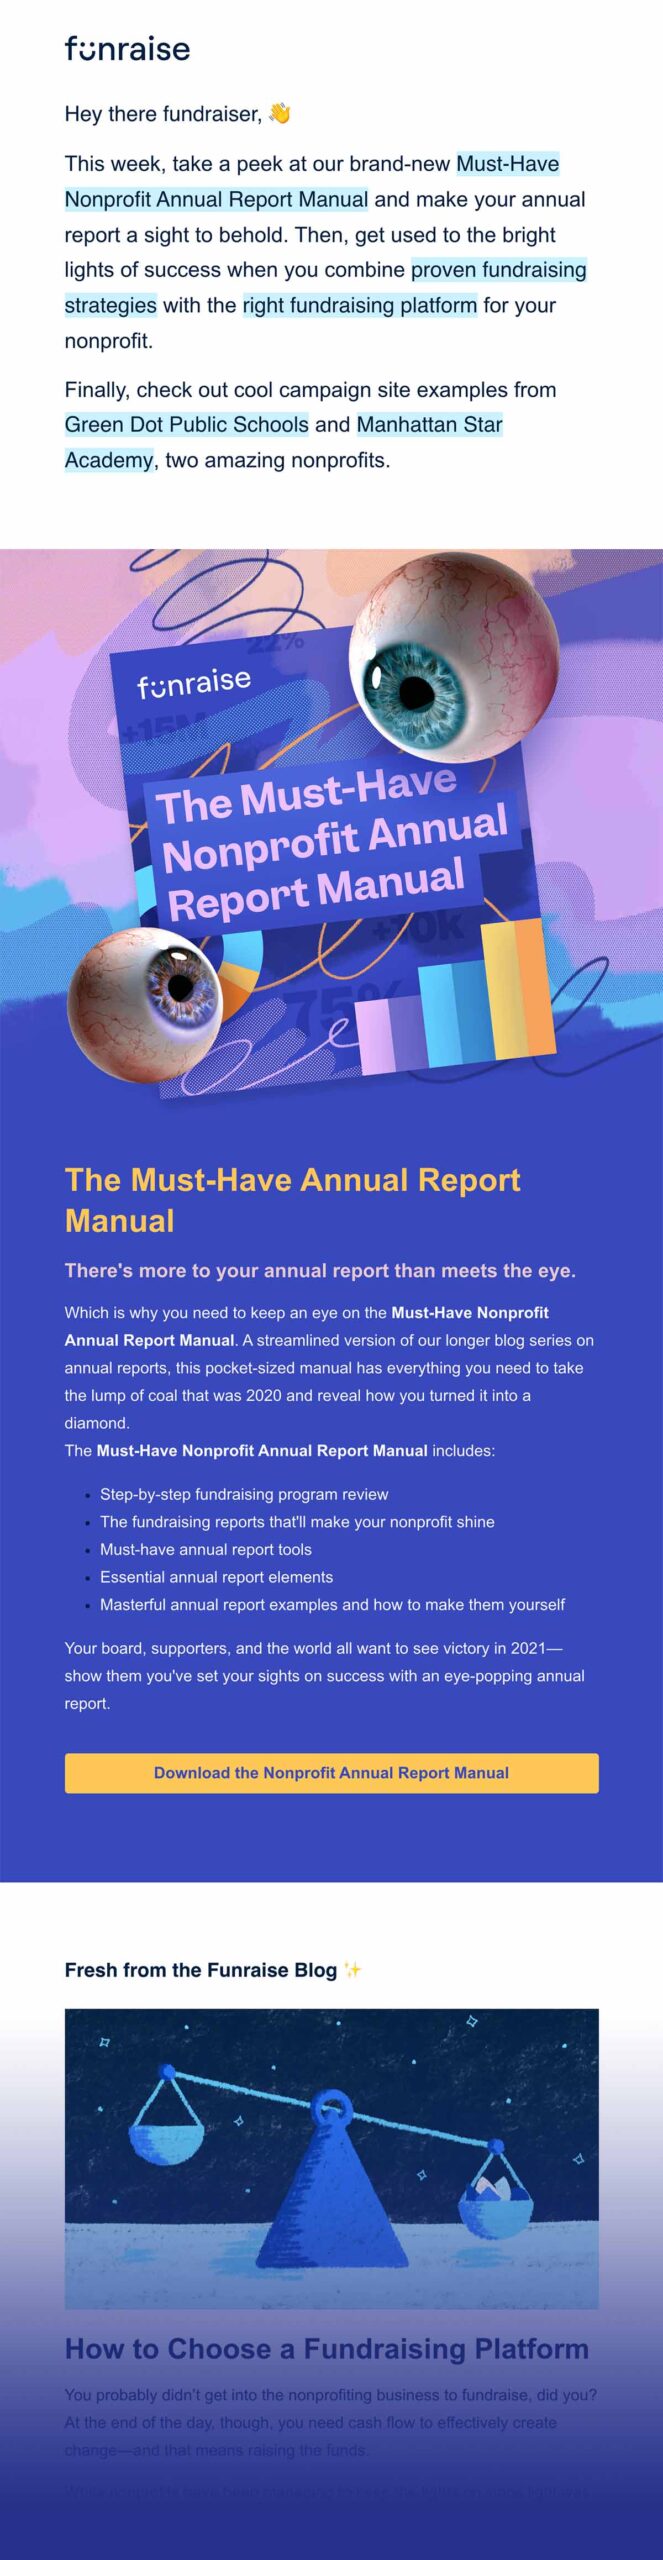 Funraise email newsletter promoting the Annual Report Manual